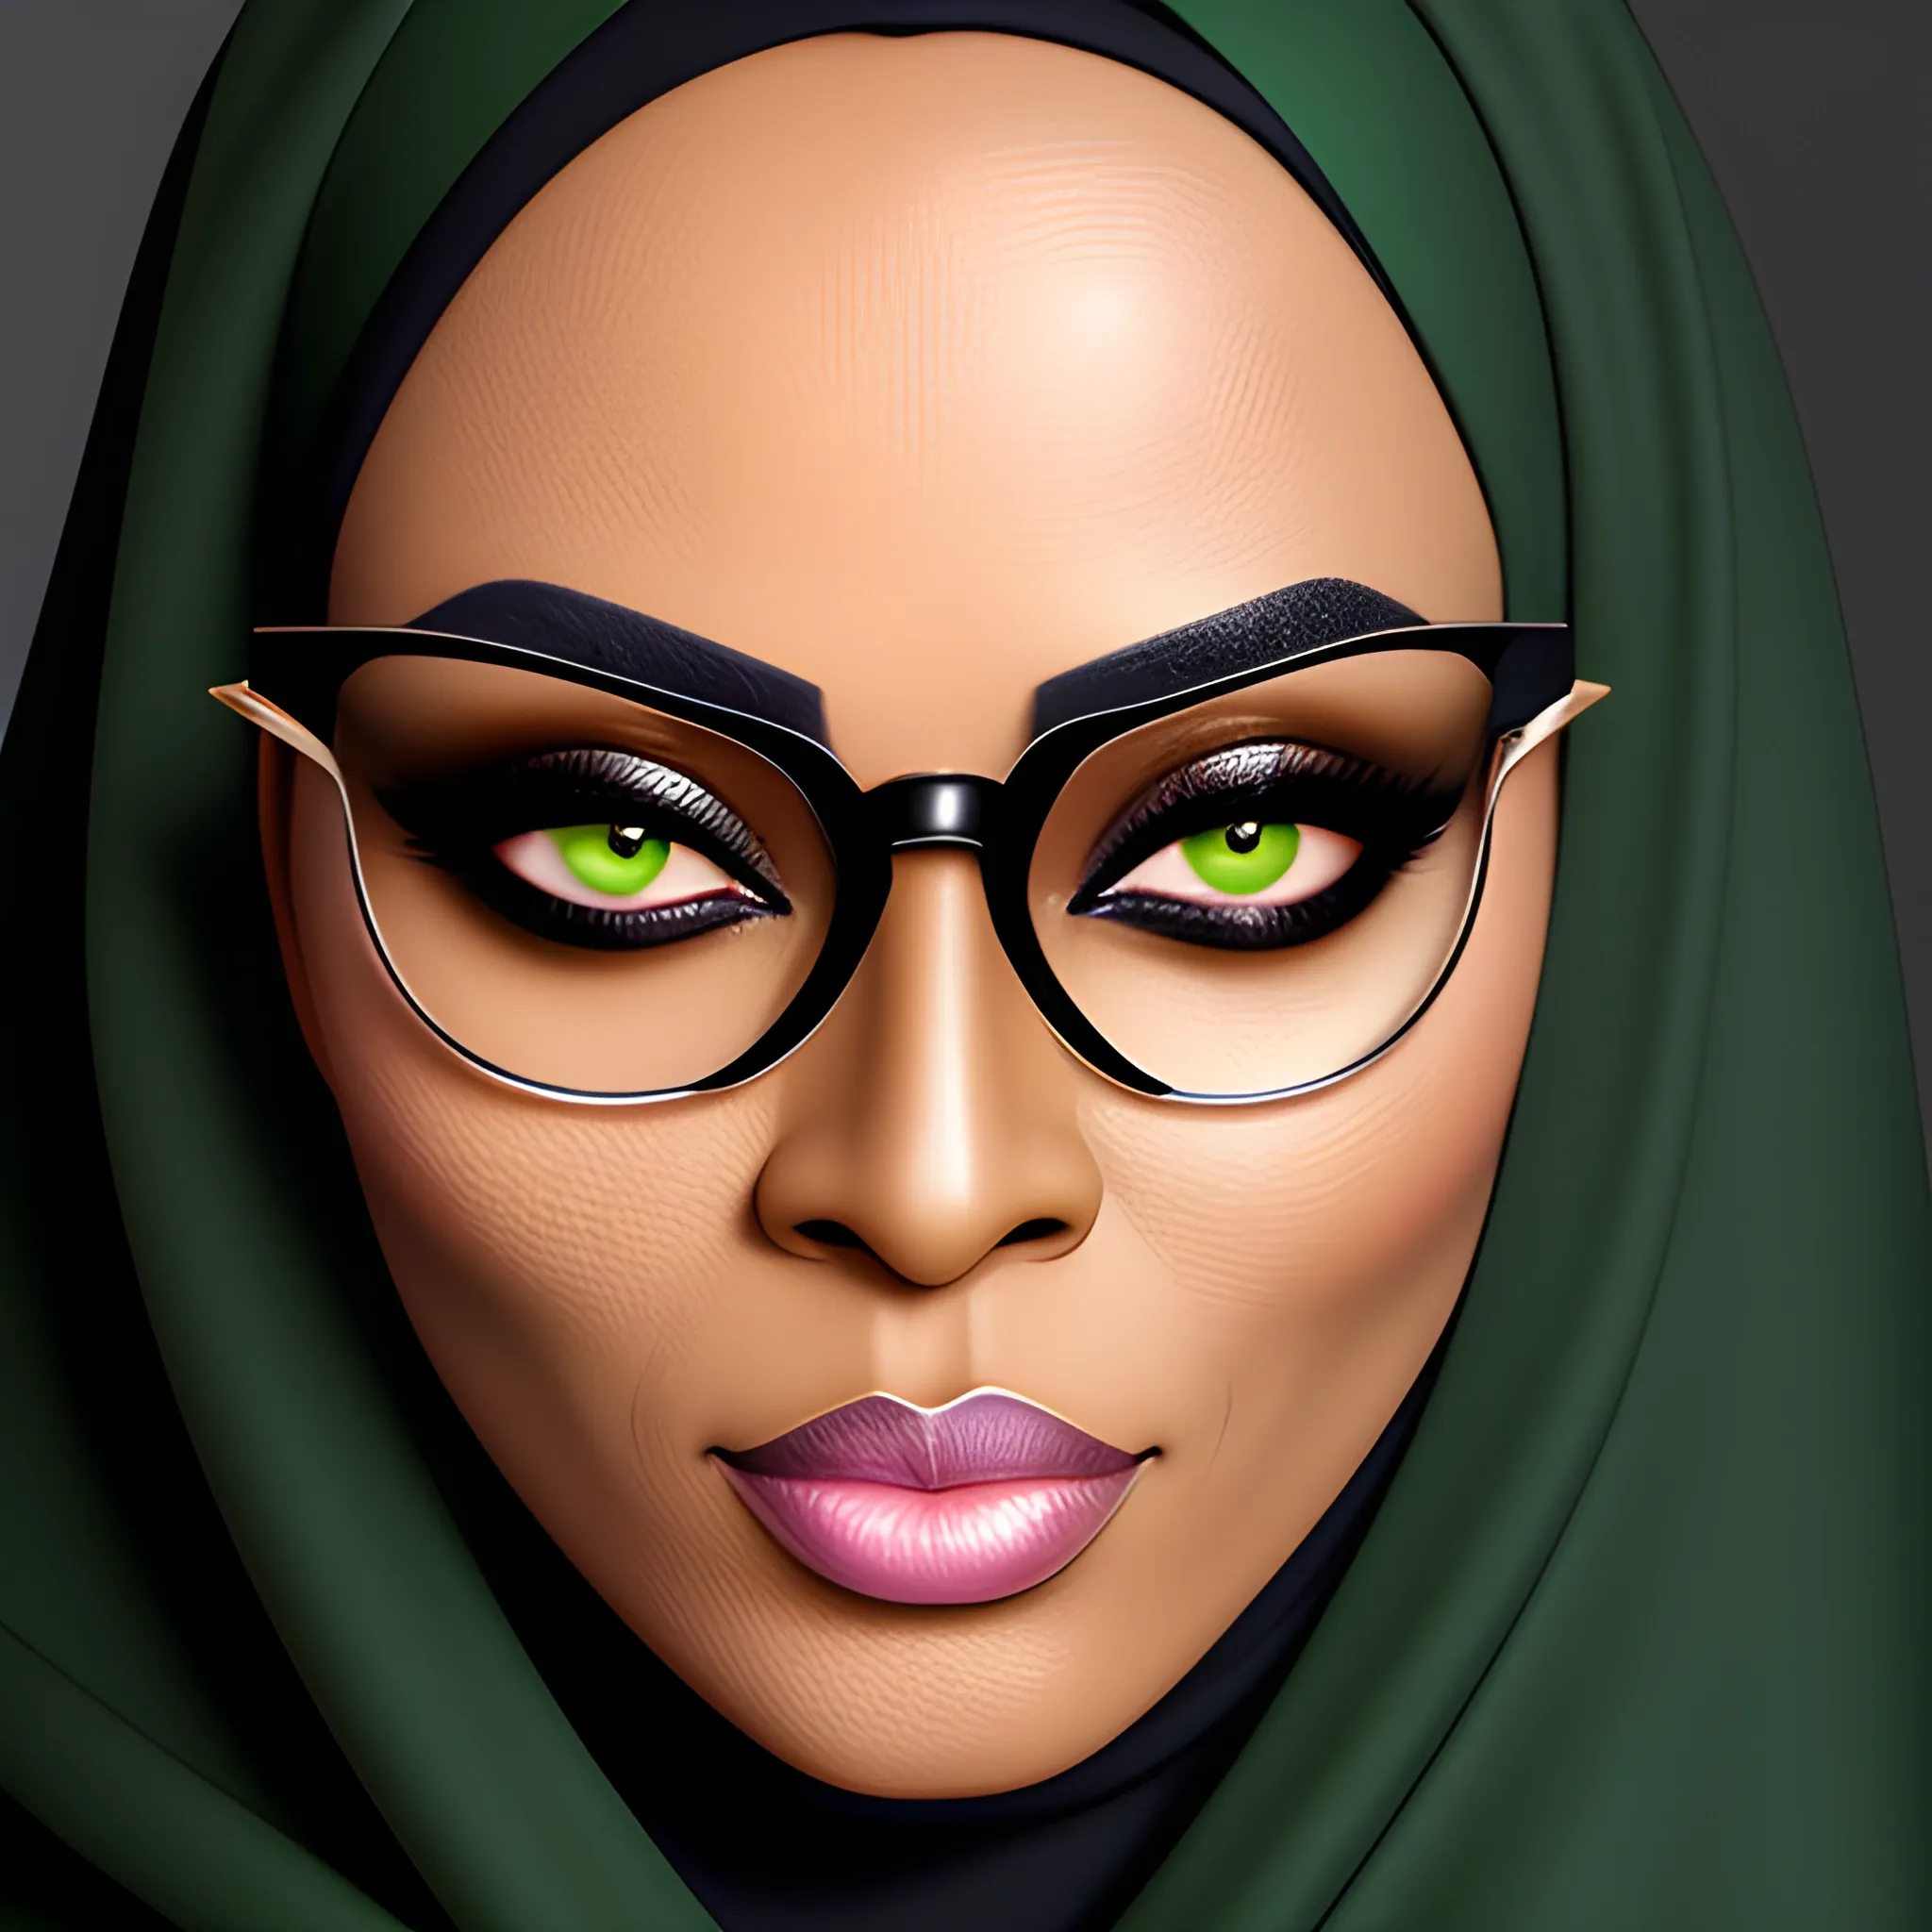 African women, long oval face, dimple chin, small eyes, black pupils, high bridge nose, thick brown lips, wearing green hijab, face fully opened, black abaya, half circle black eye glass.  Realistic highly detailed portrait picture. ,Romanticism